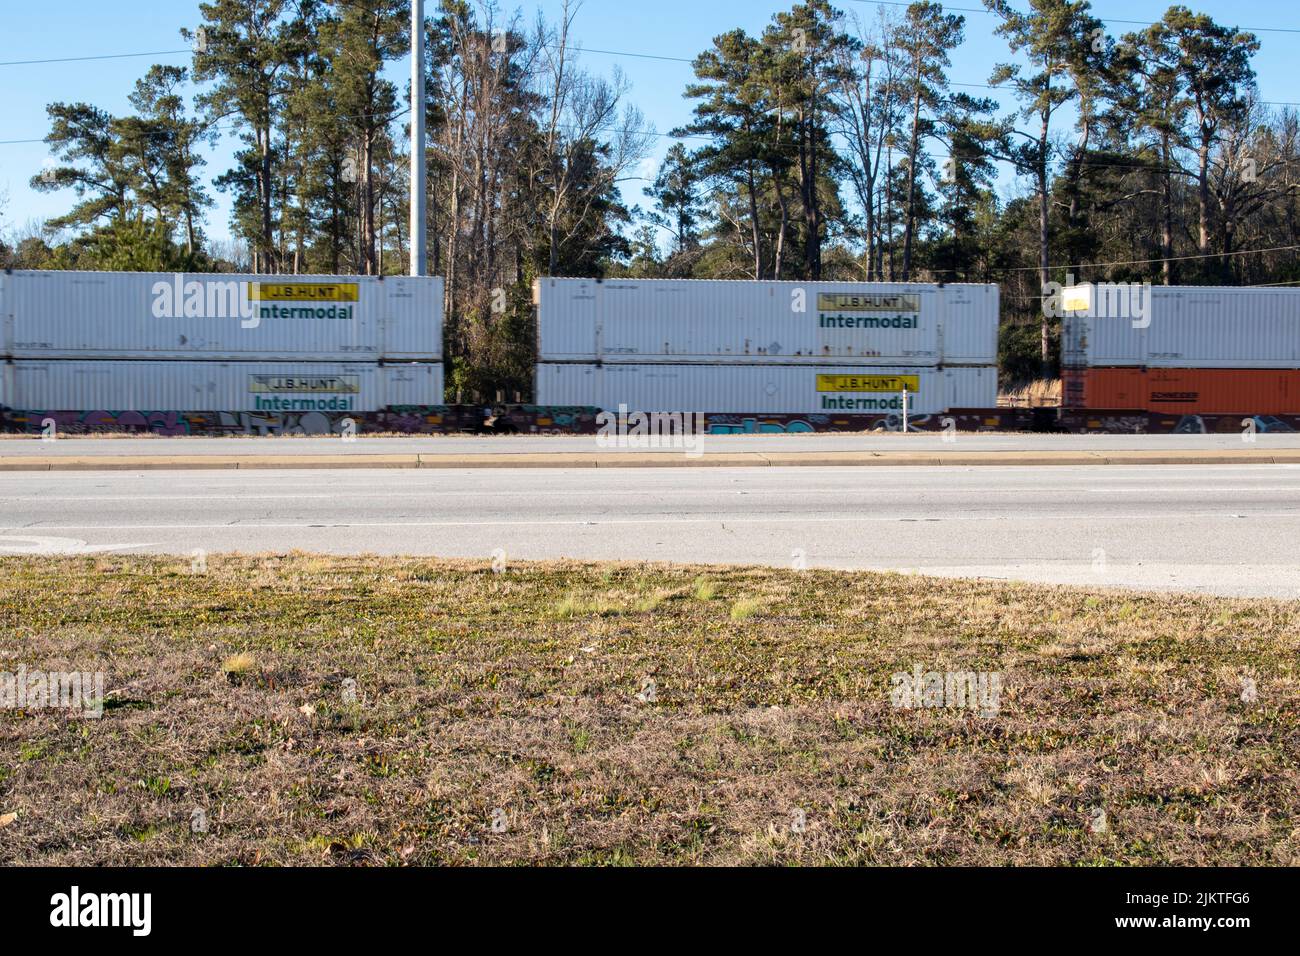 Augusta, Ga USA - 02 23 21: A double stacked train and street Stock Photo